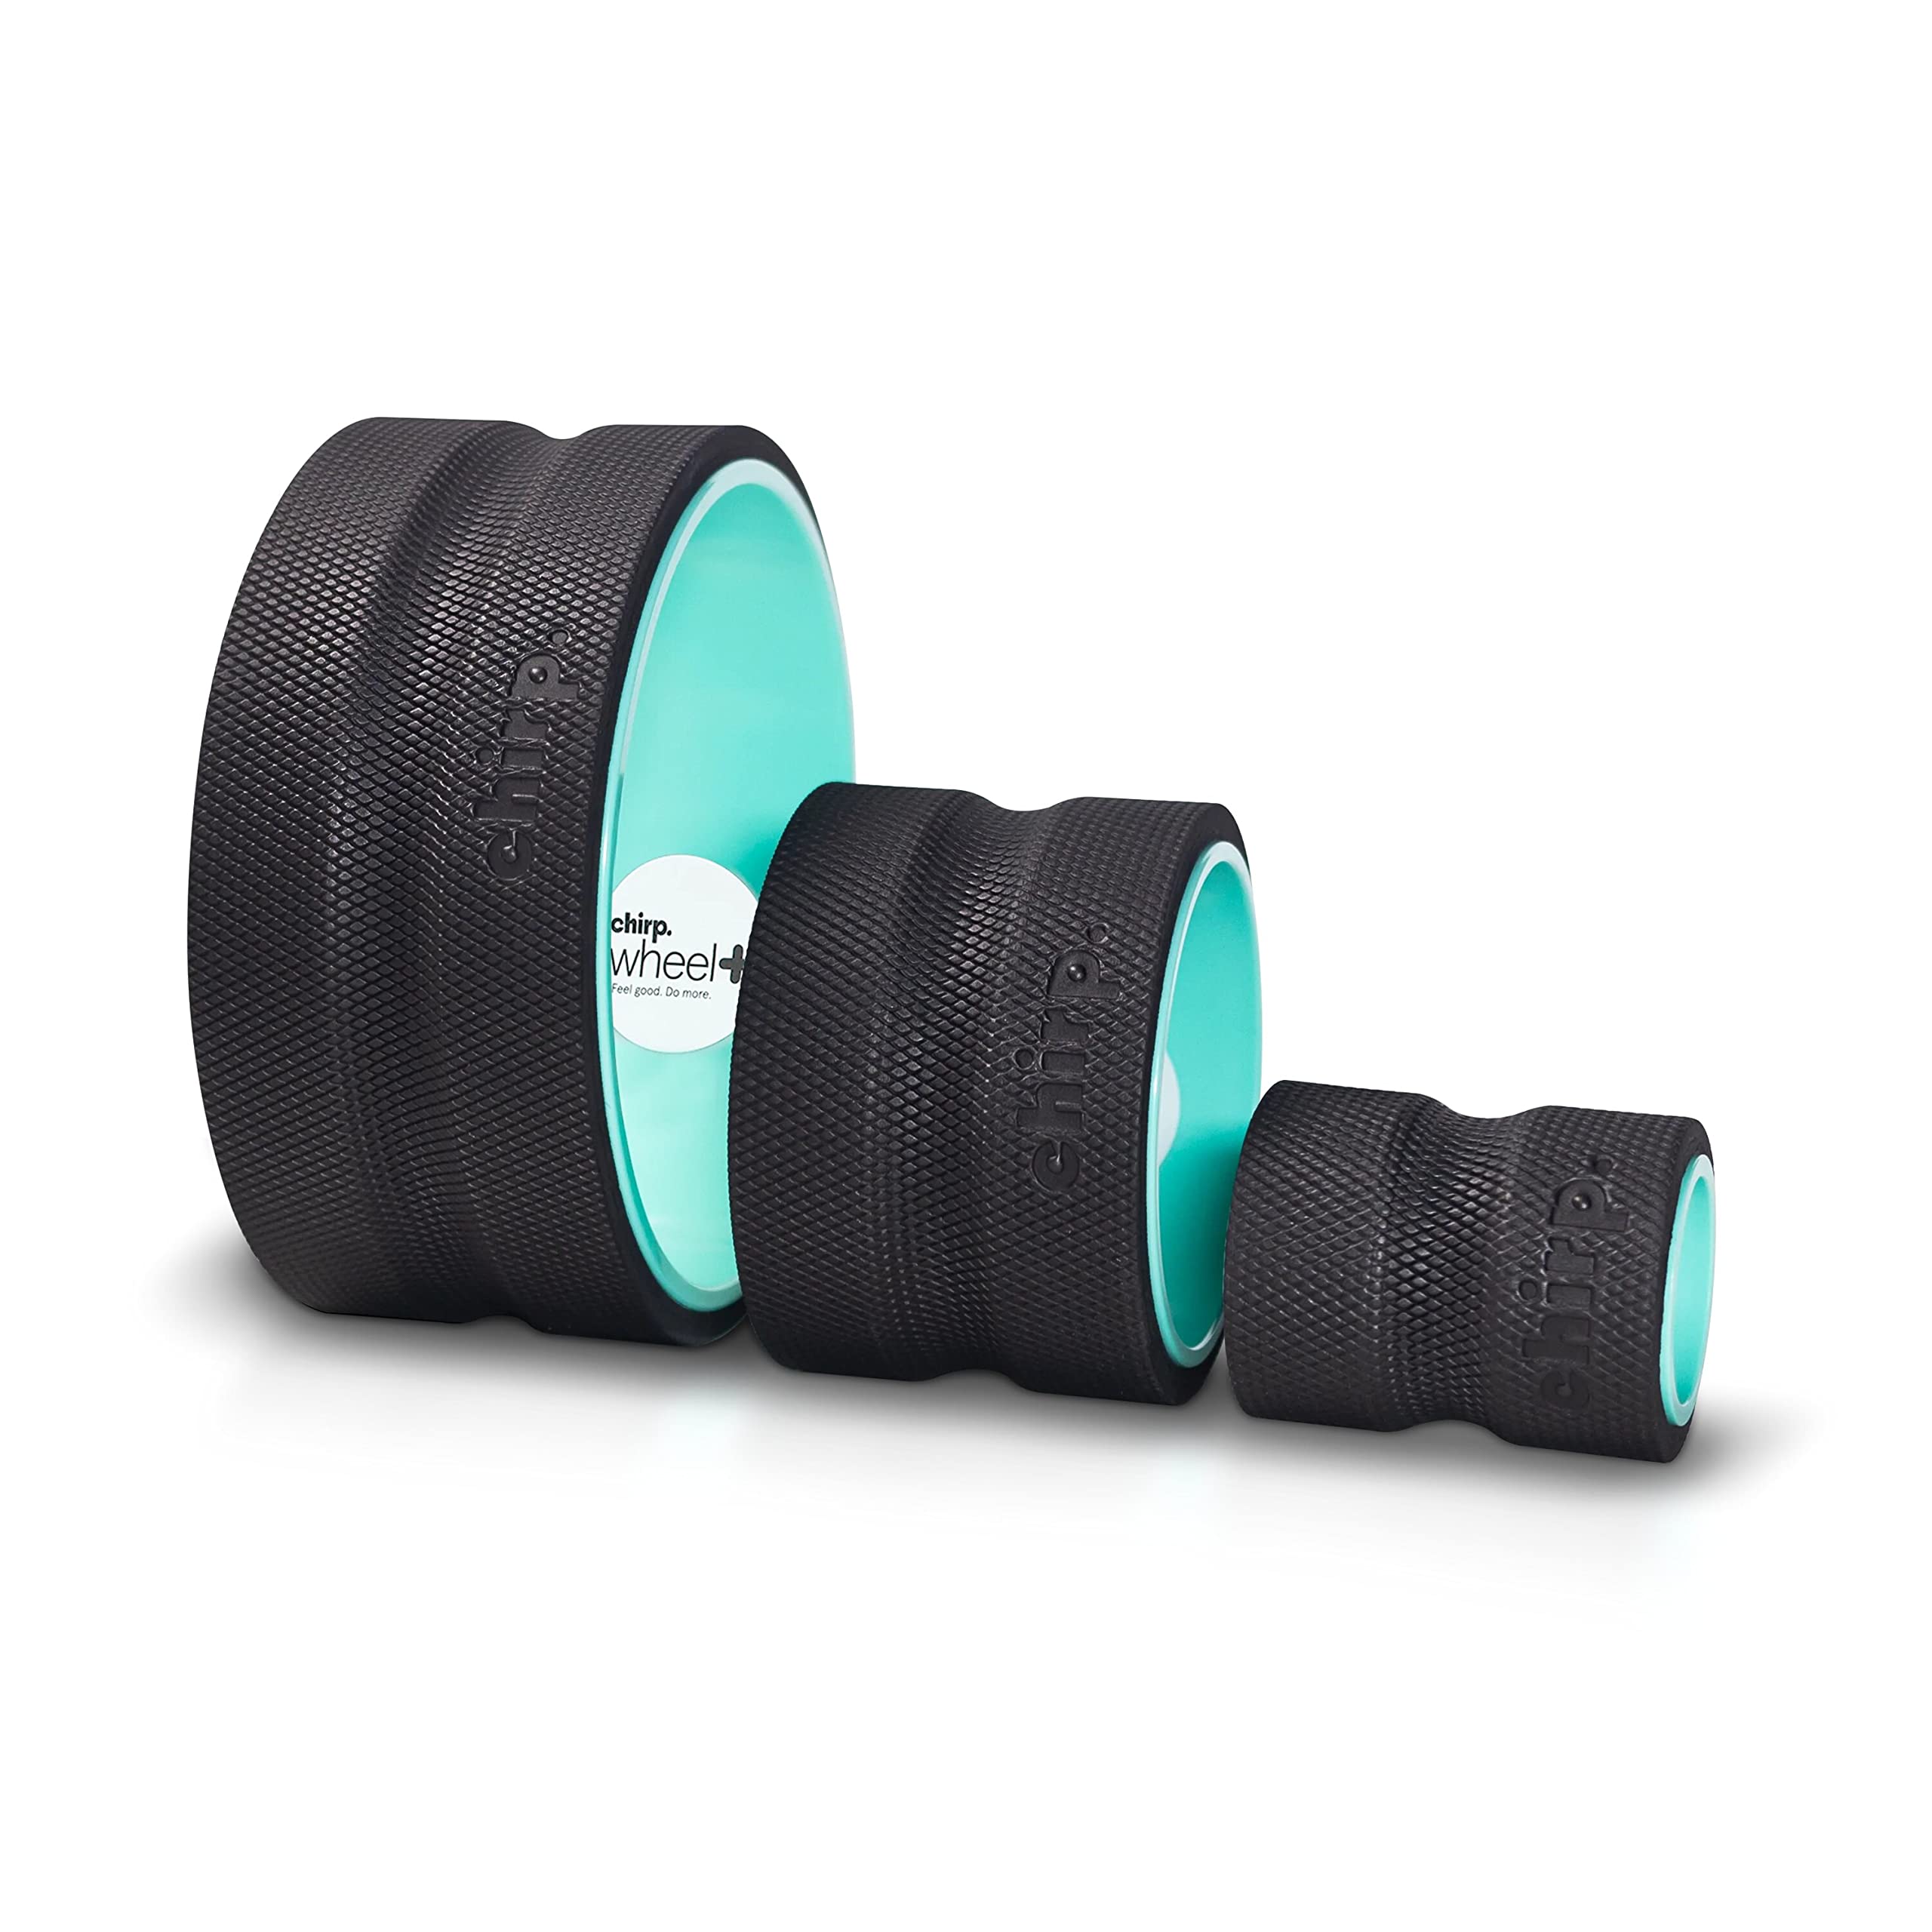 Chirp Wheel Foam Roller - Targeted Muscle Roller for Deep Tissue Massage, Back Stretcher with Foam Padding, Holds Up to 500 lbs.